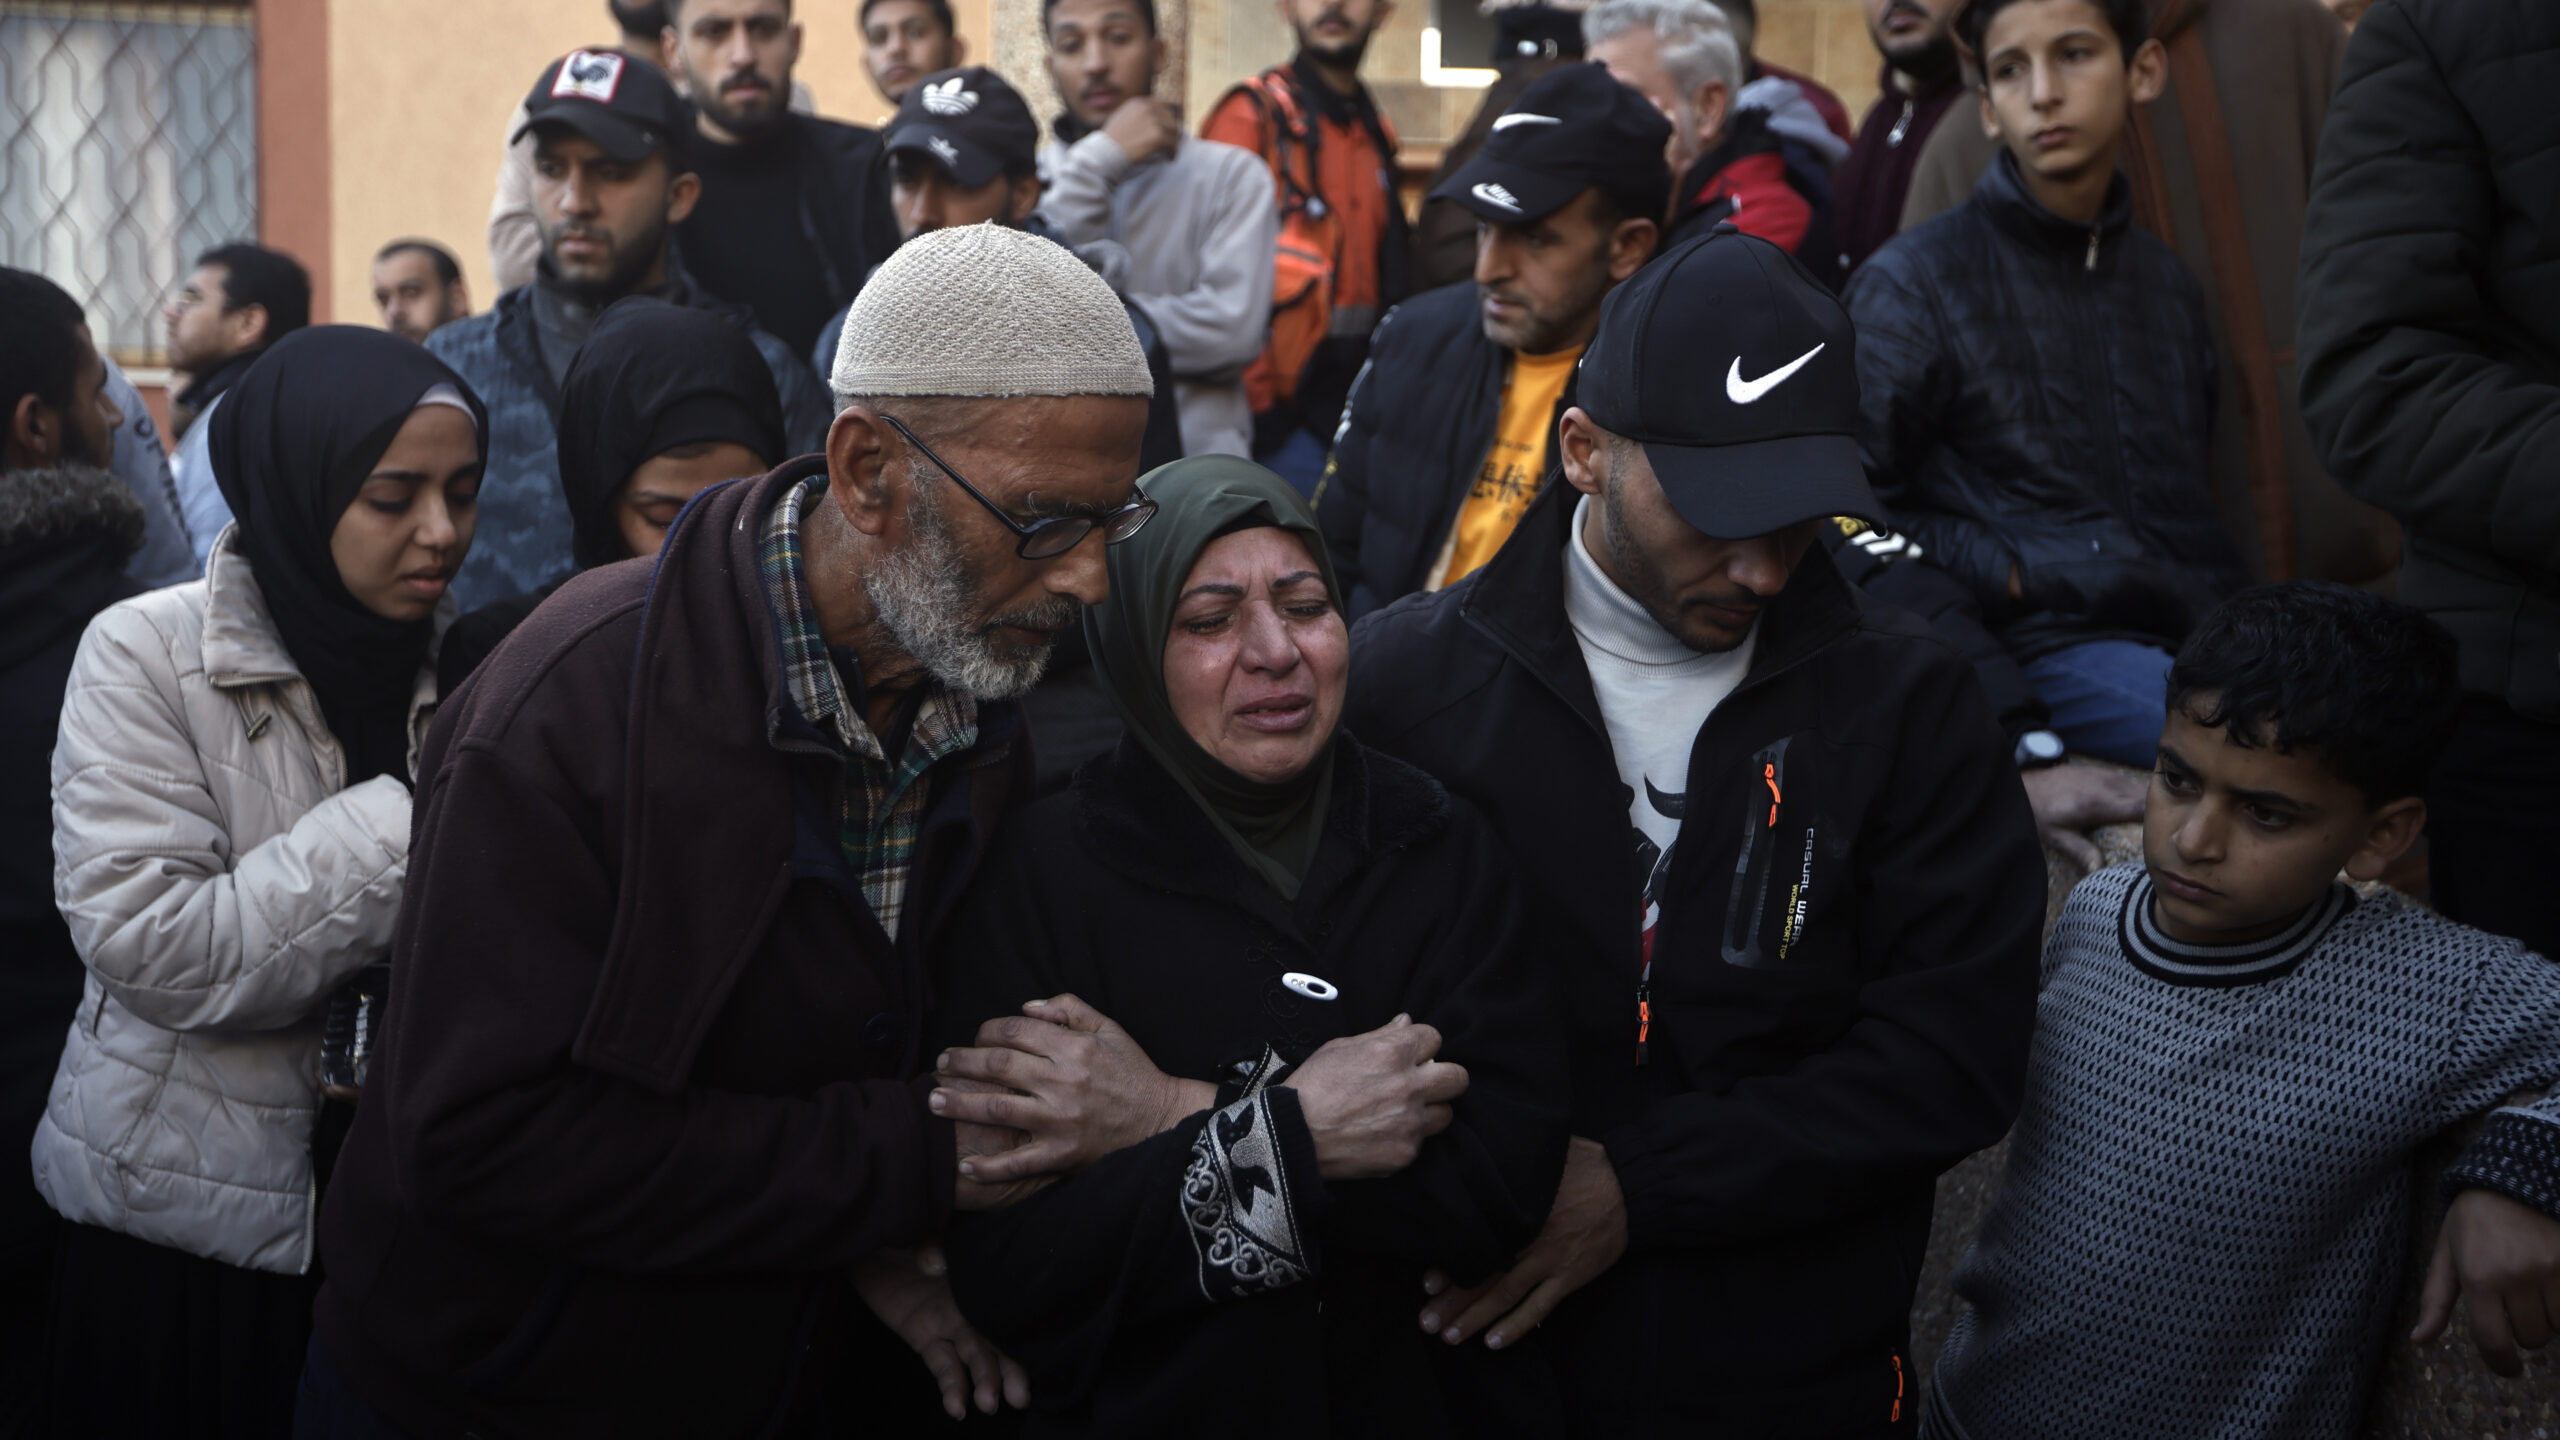 Palestinians mourn relatives killed in the Israeli bombardment of the Gaza Strip outside a morgue in Khan Younis on